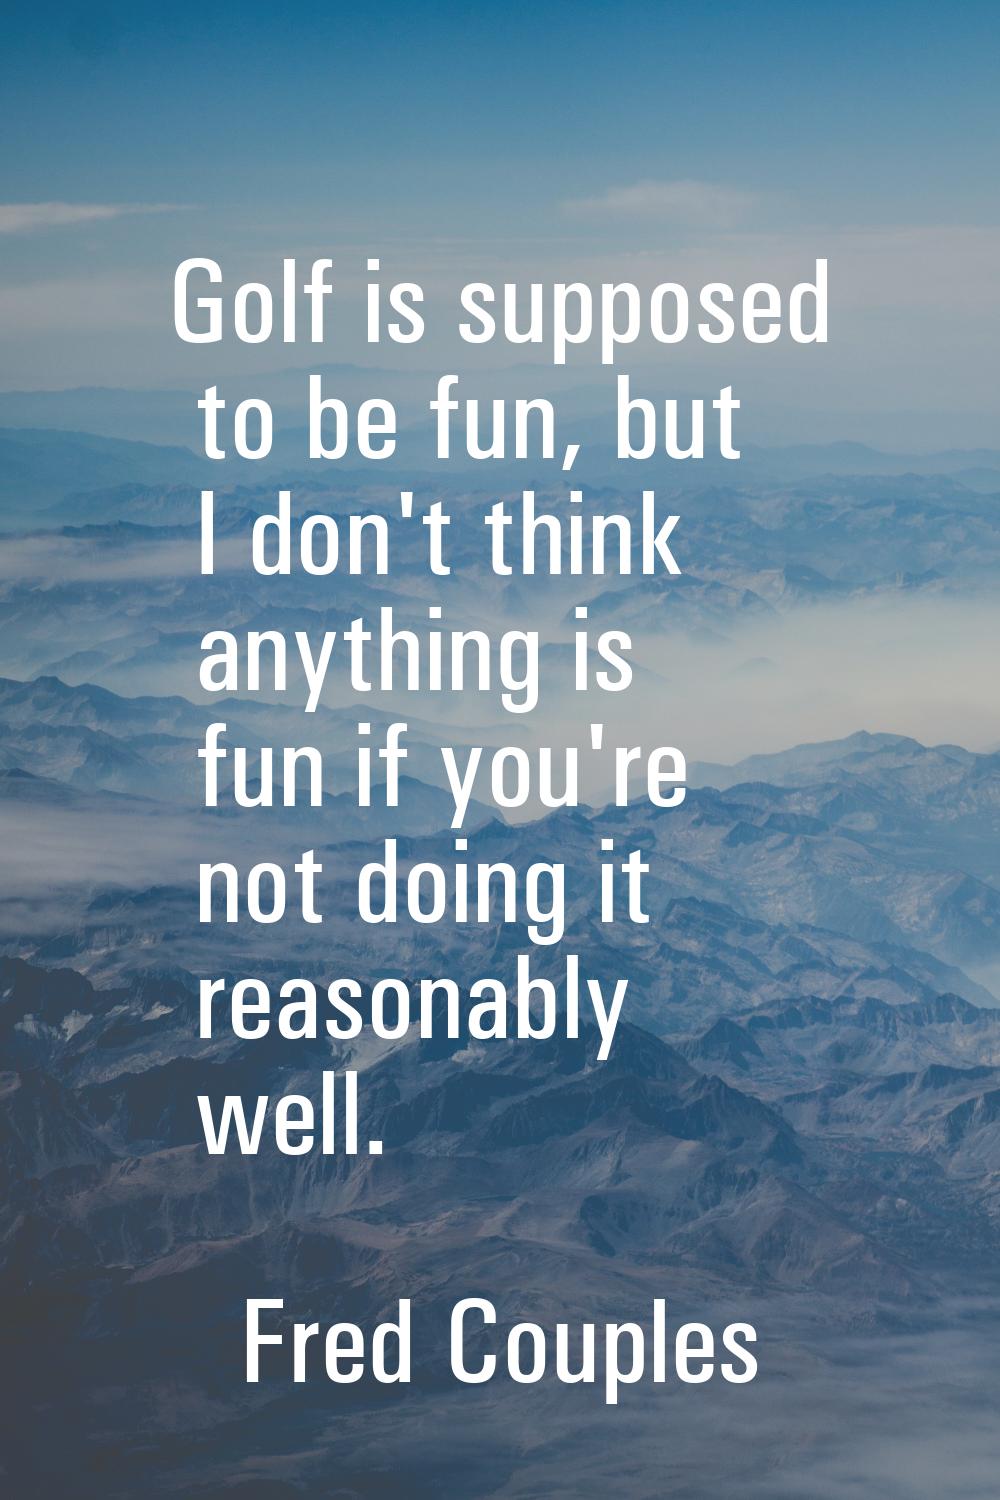 Golf is supposed to be fun, but I don't think anything is fun if you're not doing it reasonably wel